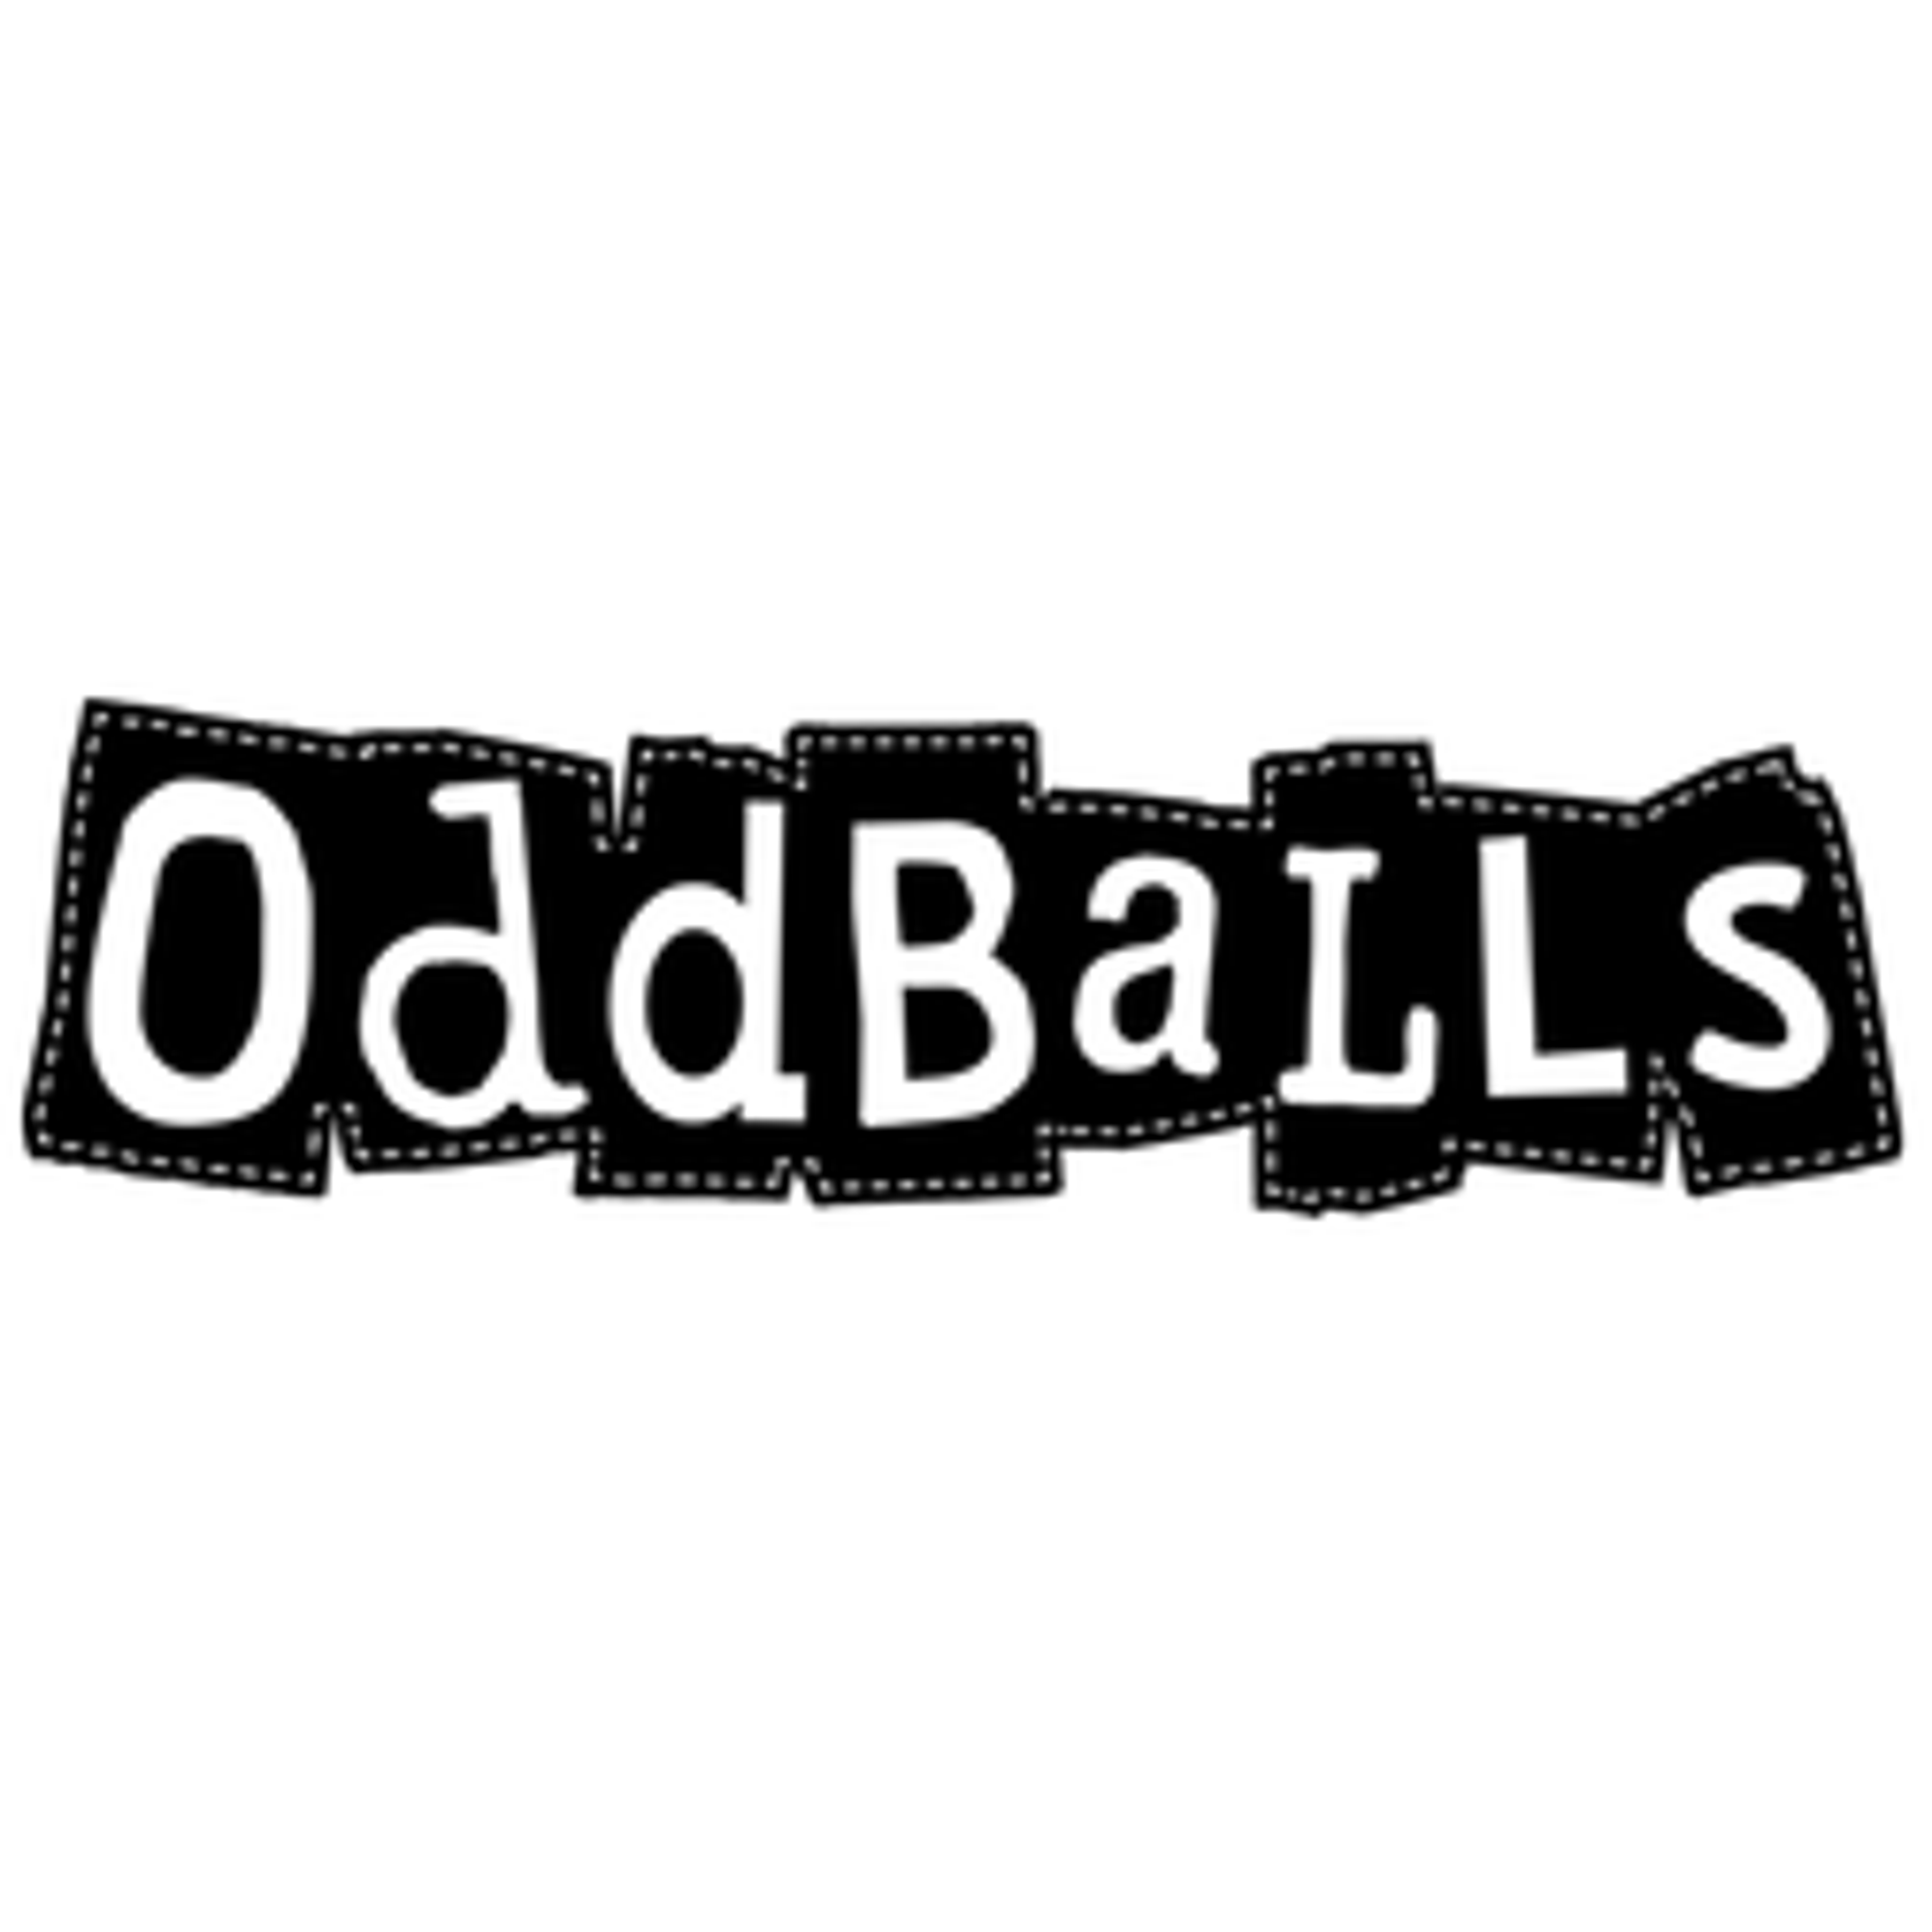 OddBalls 20% Off Full Price items - UNiDAYS student discount March 2024